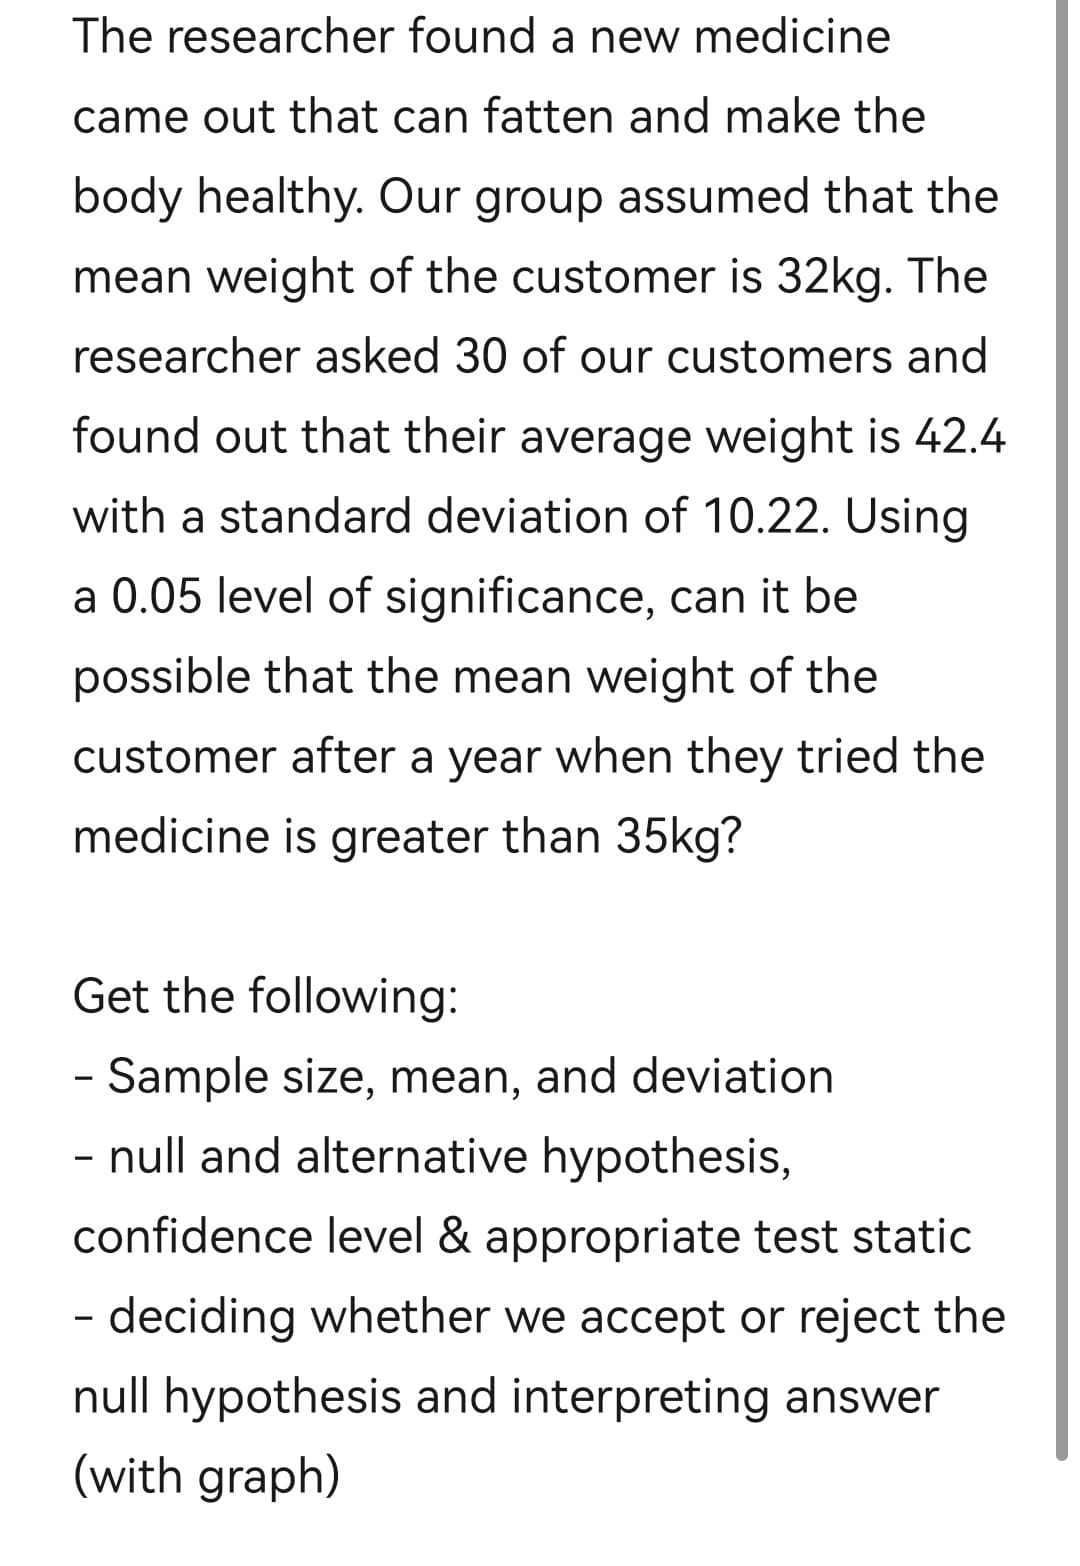 The researcher found a new medicine
came out that can fatten and make the
body healthy. Our group assumed that the
mean weight of the customer is 32kg. The
researcher asked 30 of our customers and
found out that their average weight is 42.4
with a standard deviation of 10.22. Using
a 0.05 level of significance, can it be
possible that the mean weight of the
customer after a year when they tried the
medicine is greater than 35kg?
Get the following:
- Sample size, mean, and deviation
- null and alternative hypothesis,
confidence level & appropriate test static
- deciding whether we accept or reject the
null hypothesis and interpreting answer
(with graph)
